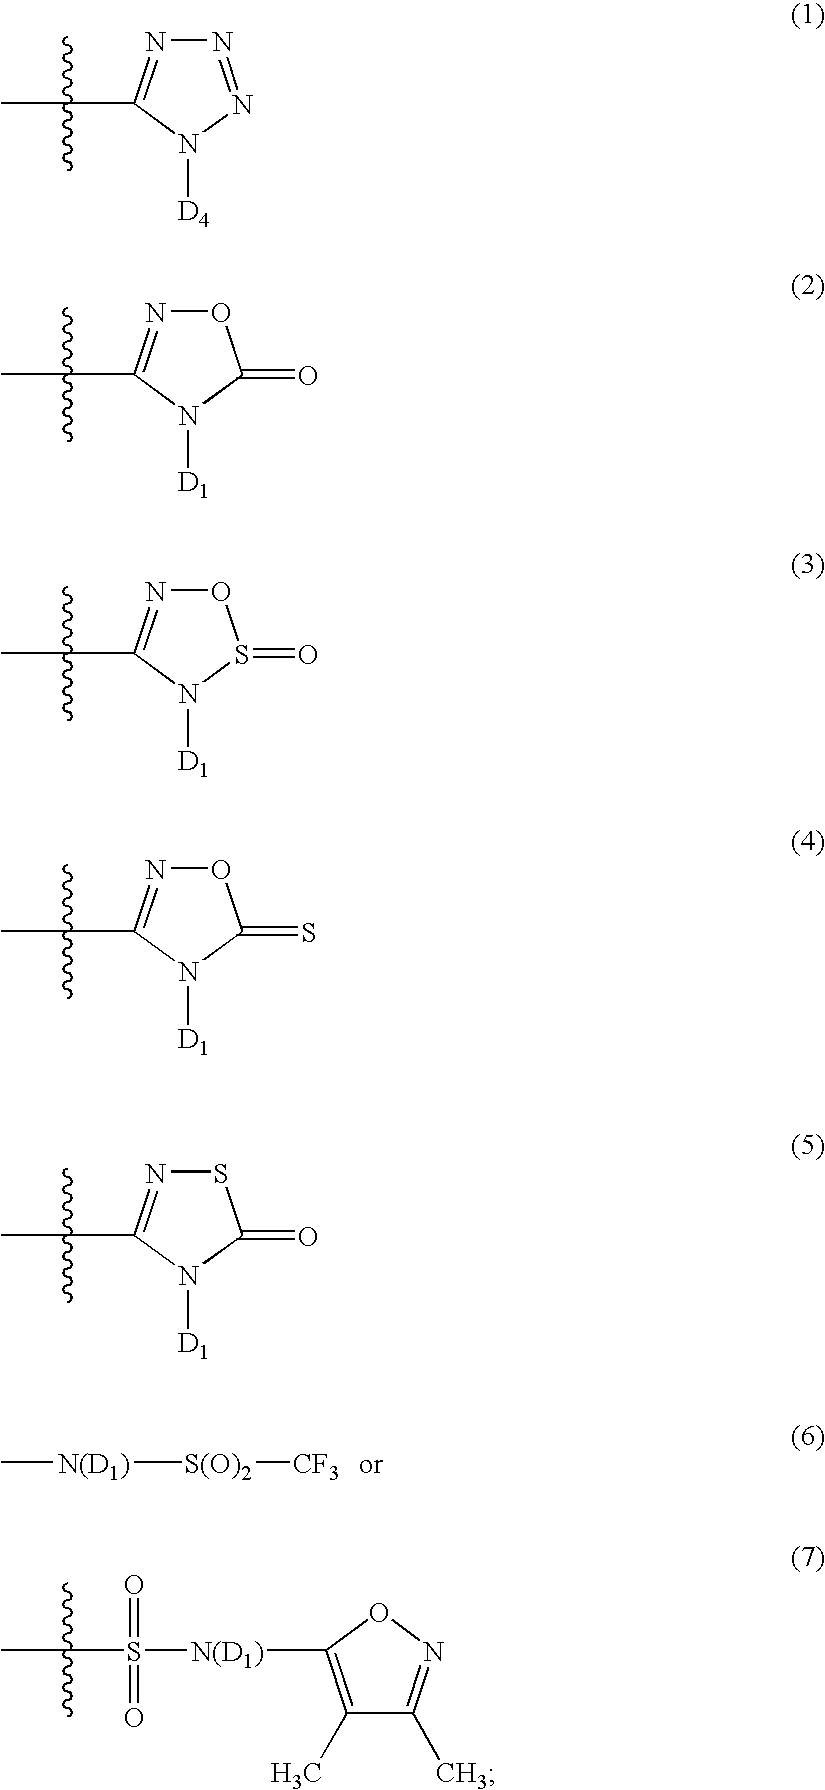 Cardiovascular Compounds Comprising Nitric Oxide Enhancing Groups, Compositions and Methods of Use